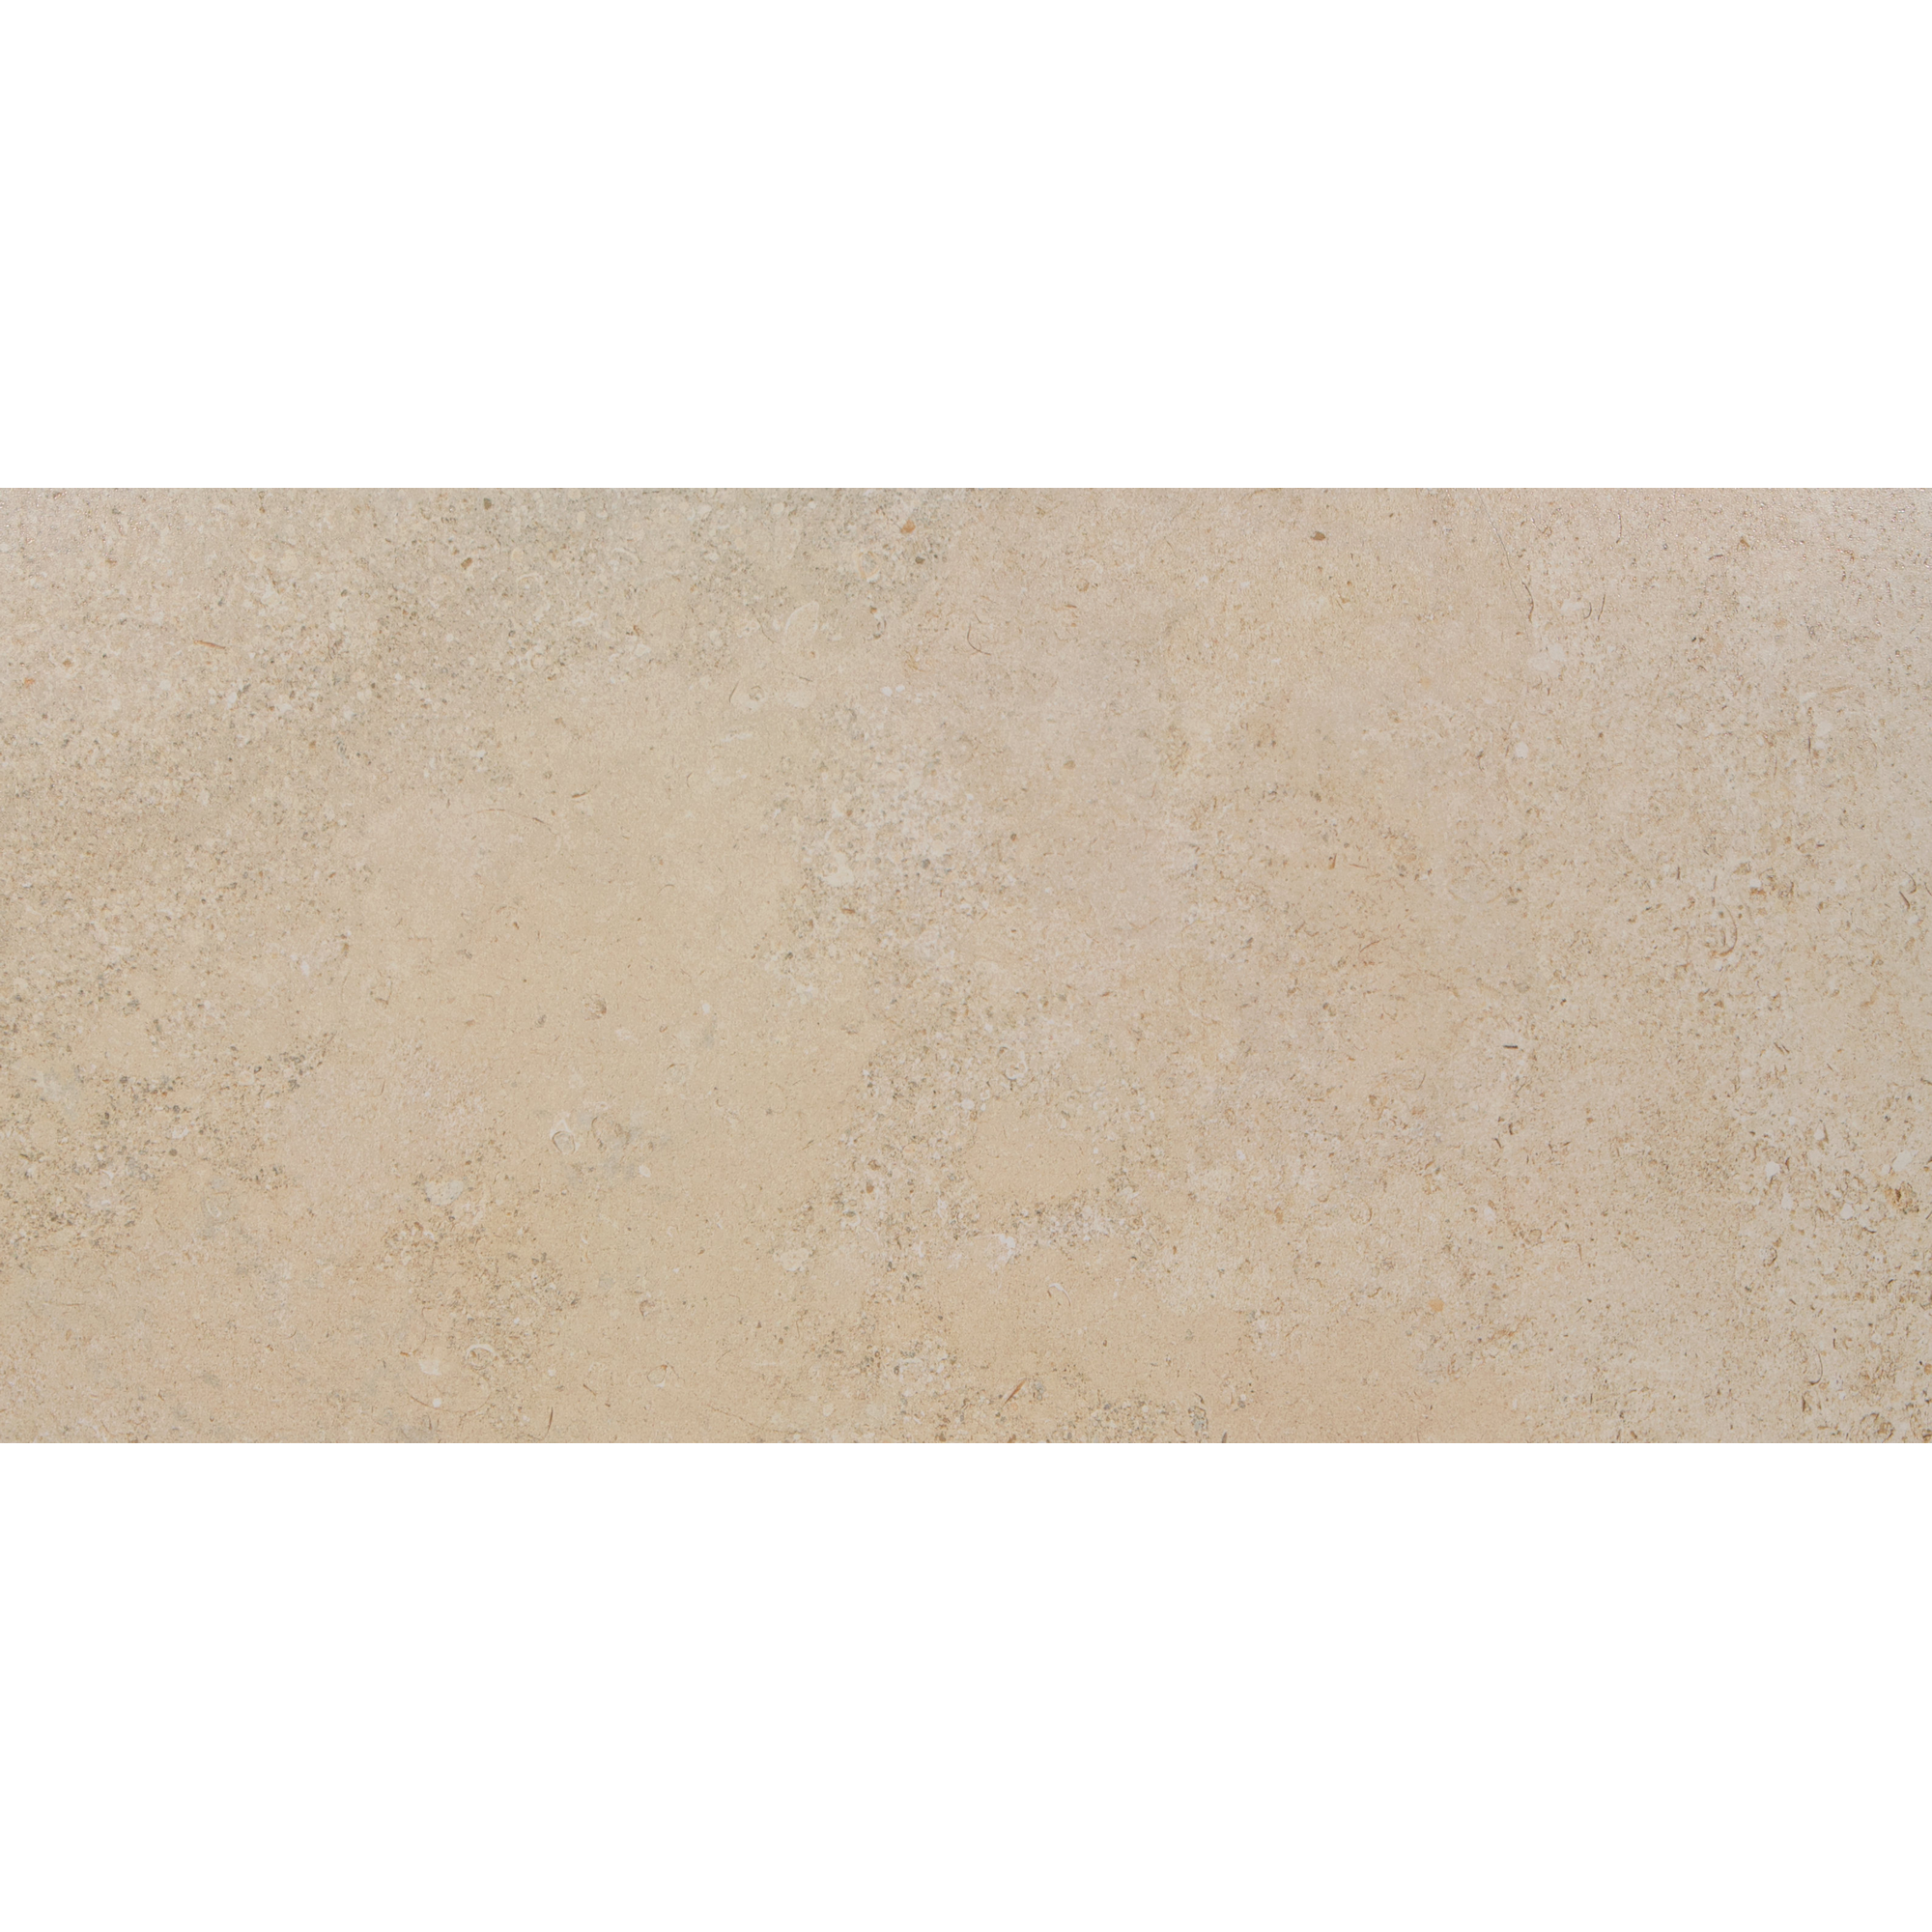 Bodenfliese 'Lims' beige 30 x 60 cm + product picture